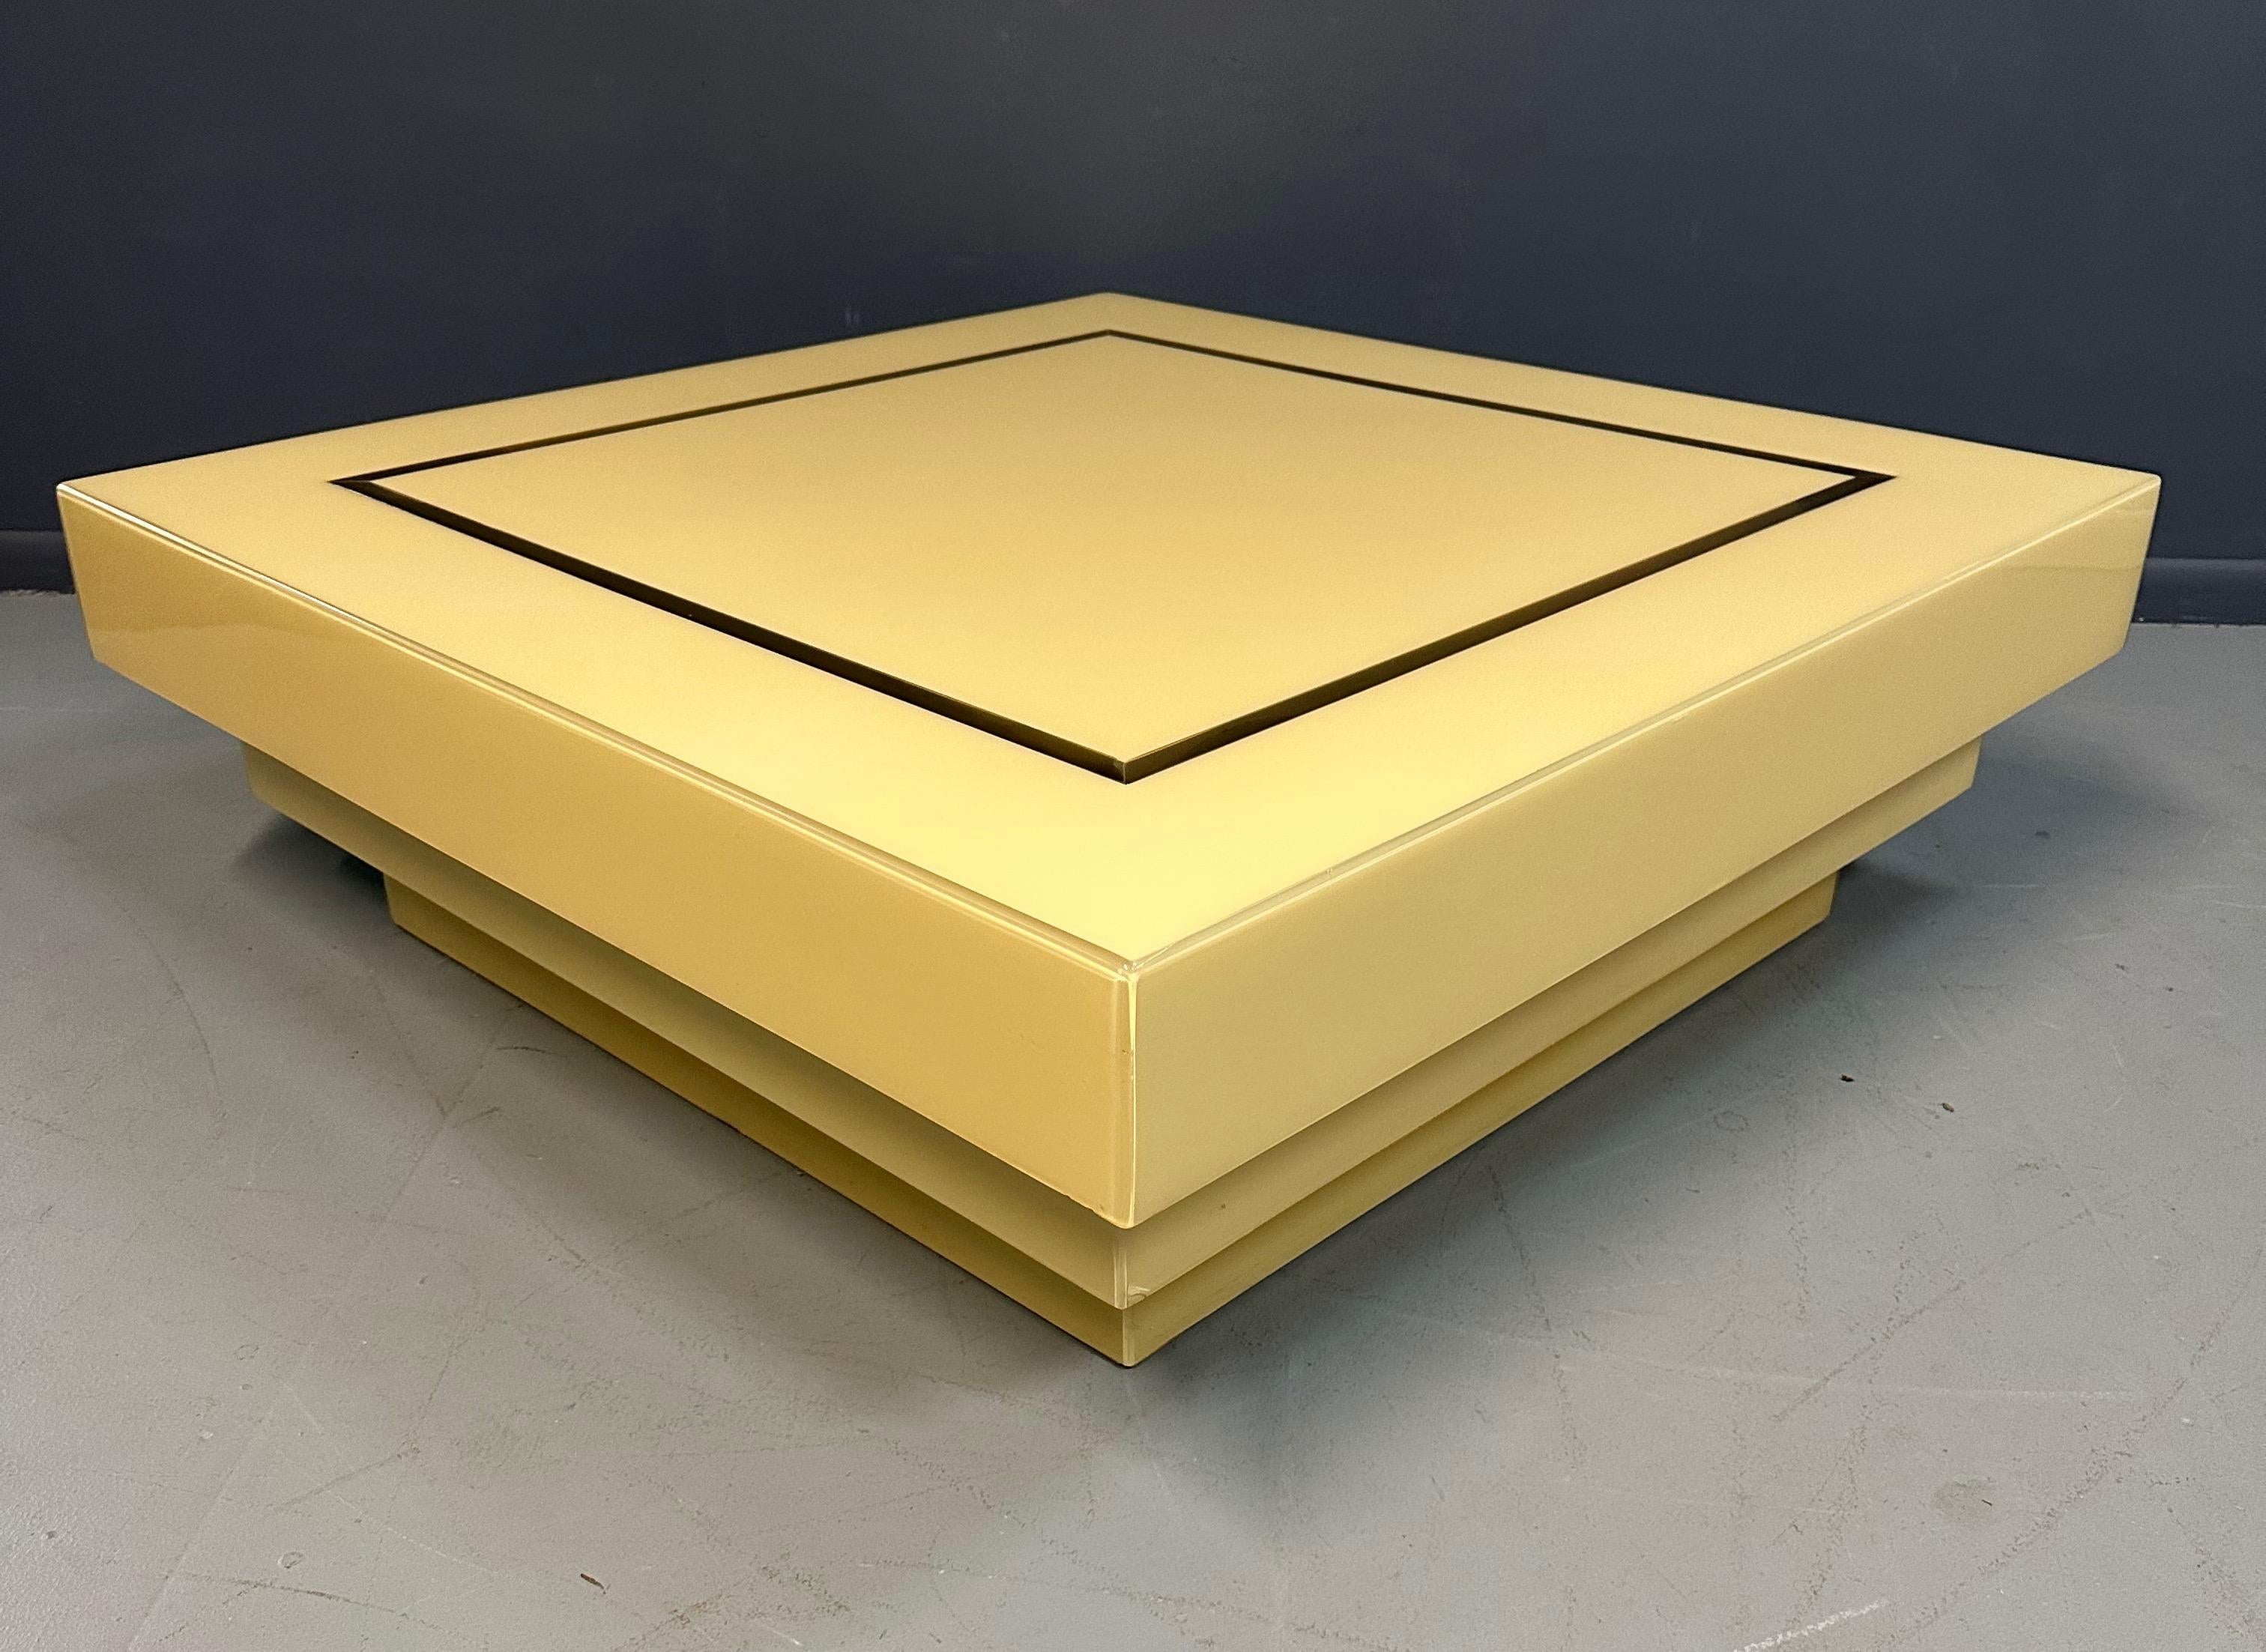 This stunning 1970s coffee table showcases eye-catching design with its stepped cream acrylic body and brass ribbon inlay. Create a unique look in your home with this stylish piece of mid-century modern design. The lovely serene color of this table